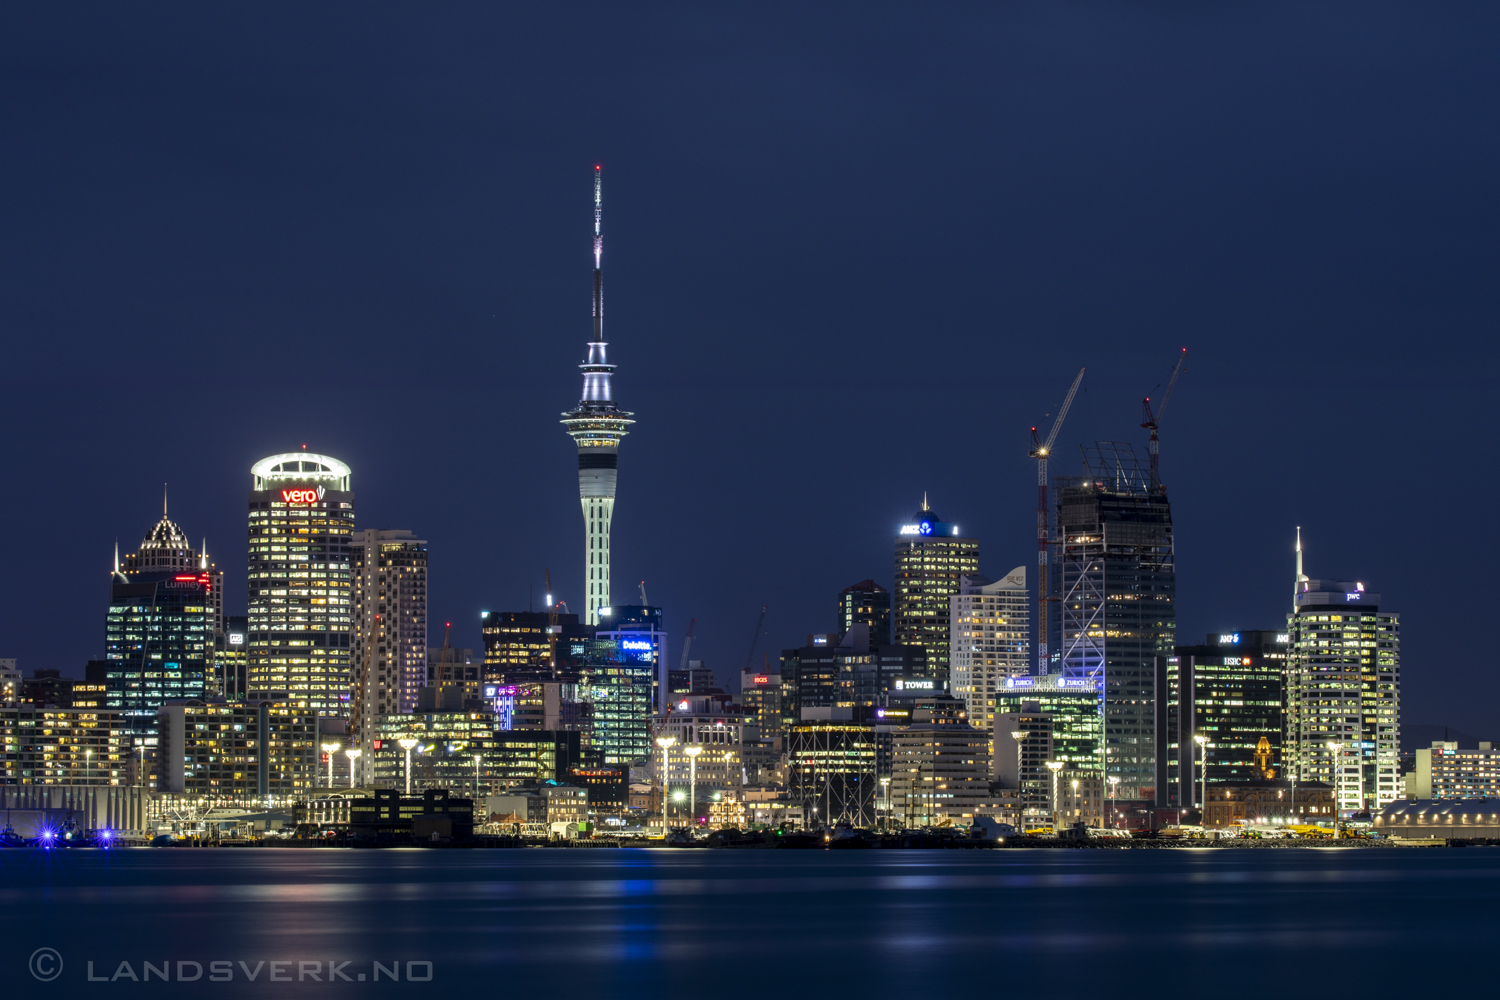 Auckland, New Zealand. 

(Canon EOS 5D Mark IV / Canon EF 100-400mm f/4.5-5.6 L IS II USM)